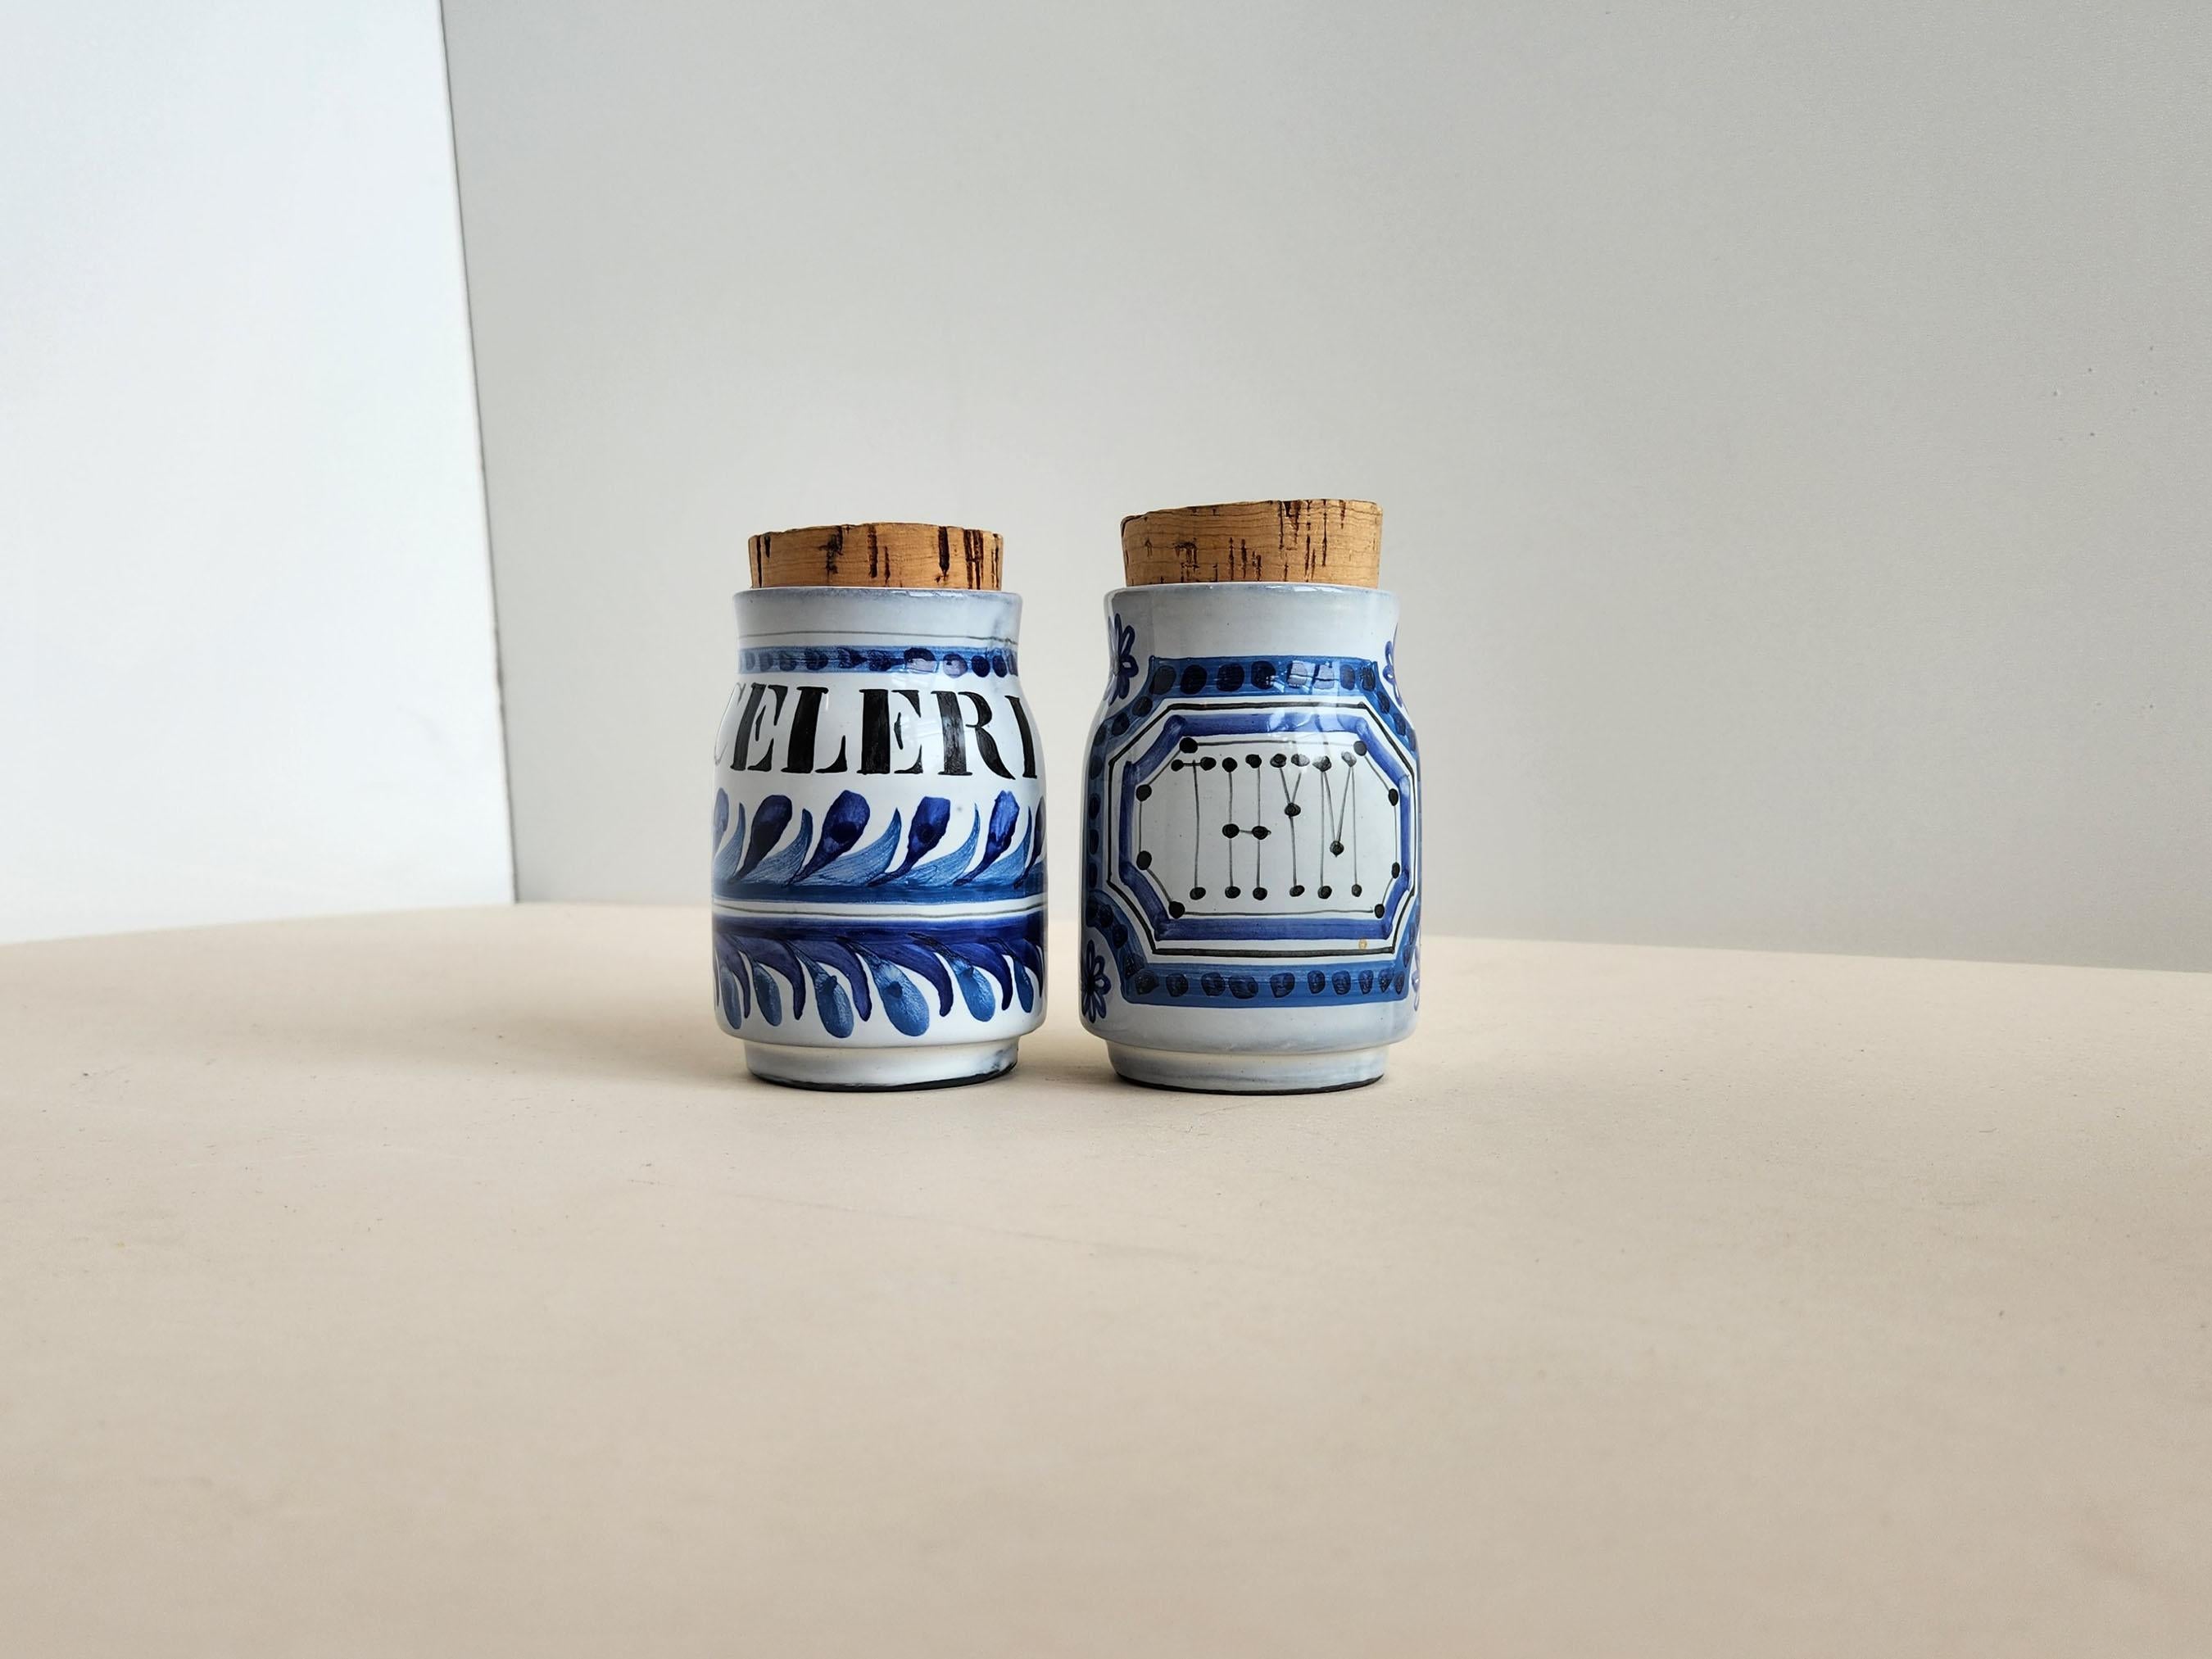 Vintage Ceramic Jars with Cork Lids for Celery and Thyme by Roger Capron - Vallauris, France

Roger Capron was in influential French ceramicist, known for his tiled tables and his use of recurring motifs such as stylized branches and geometrical